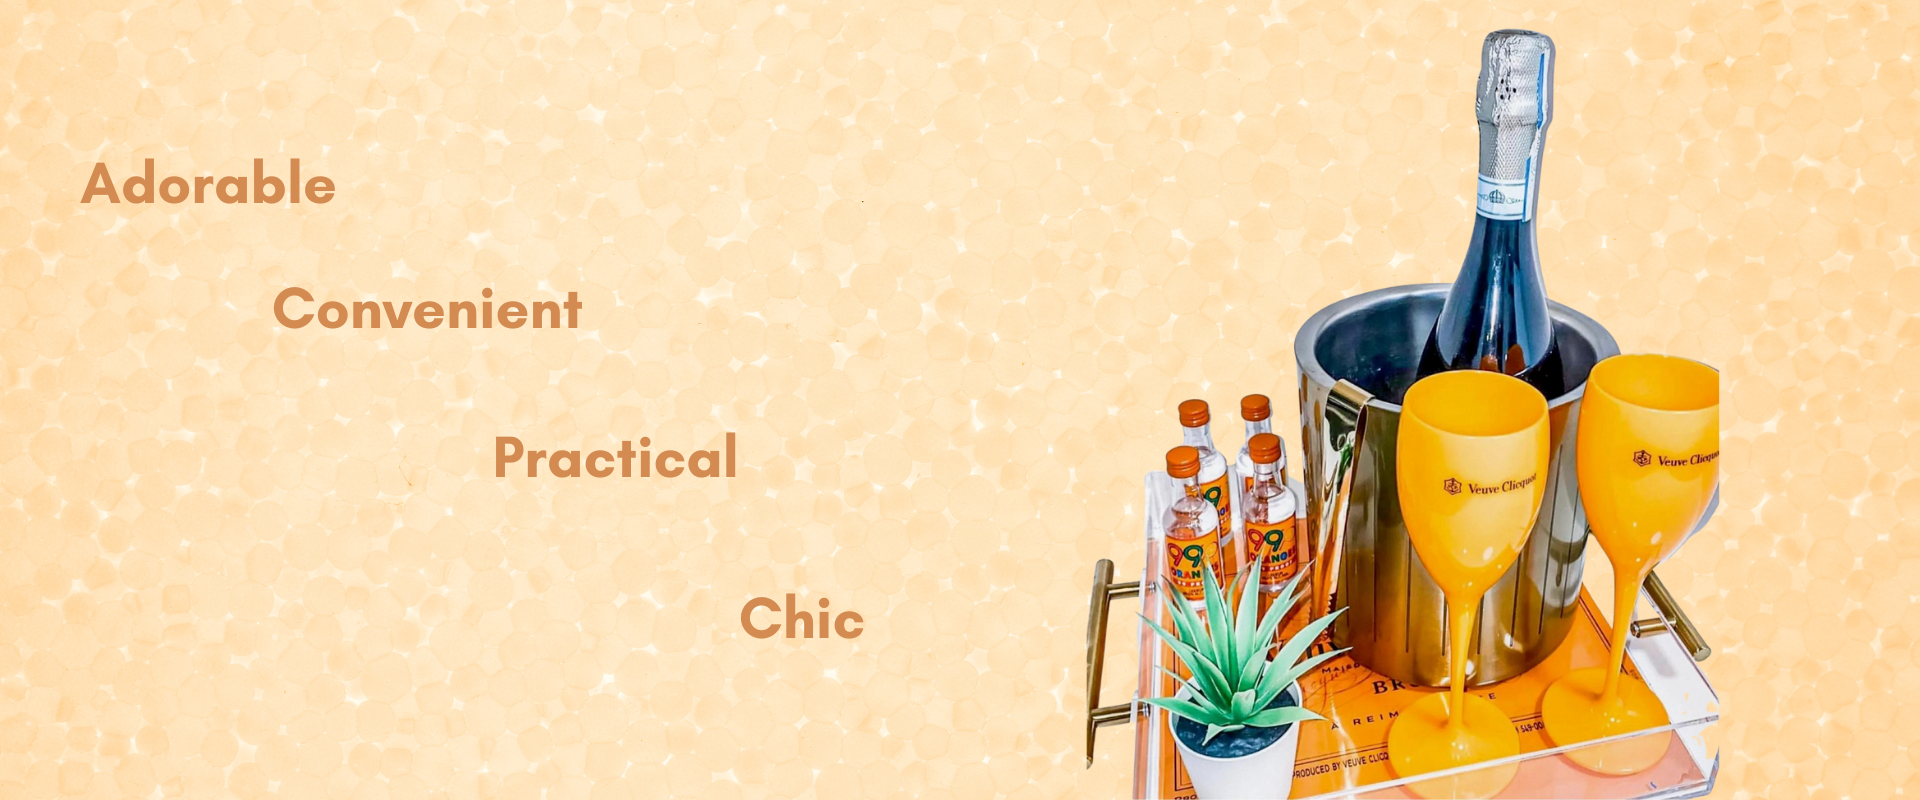 Adorable, Convenient, Practical, Chic. Two orange plastic champagne cups on top of an orange tray next to a plant, wine cooler, wine, and bottles.